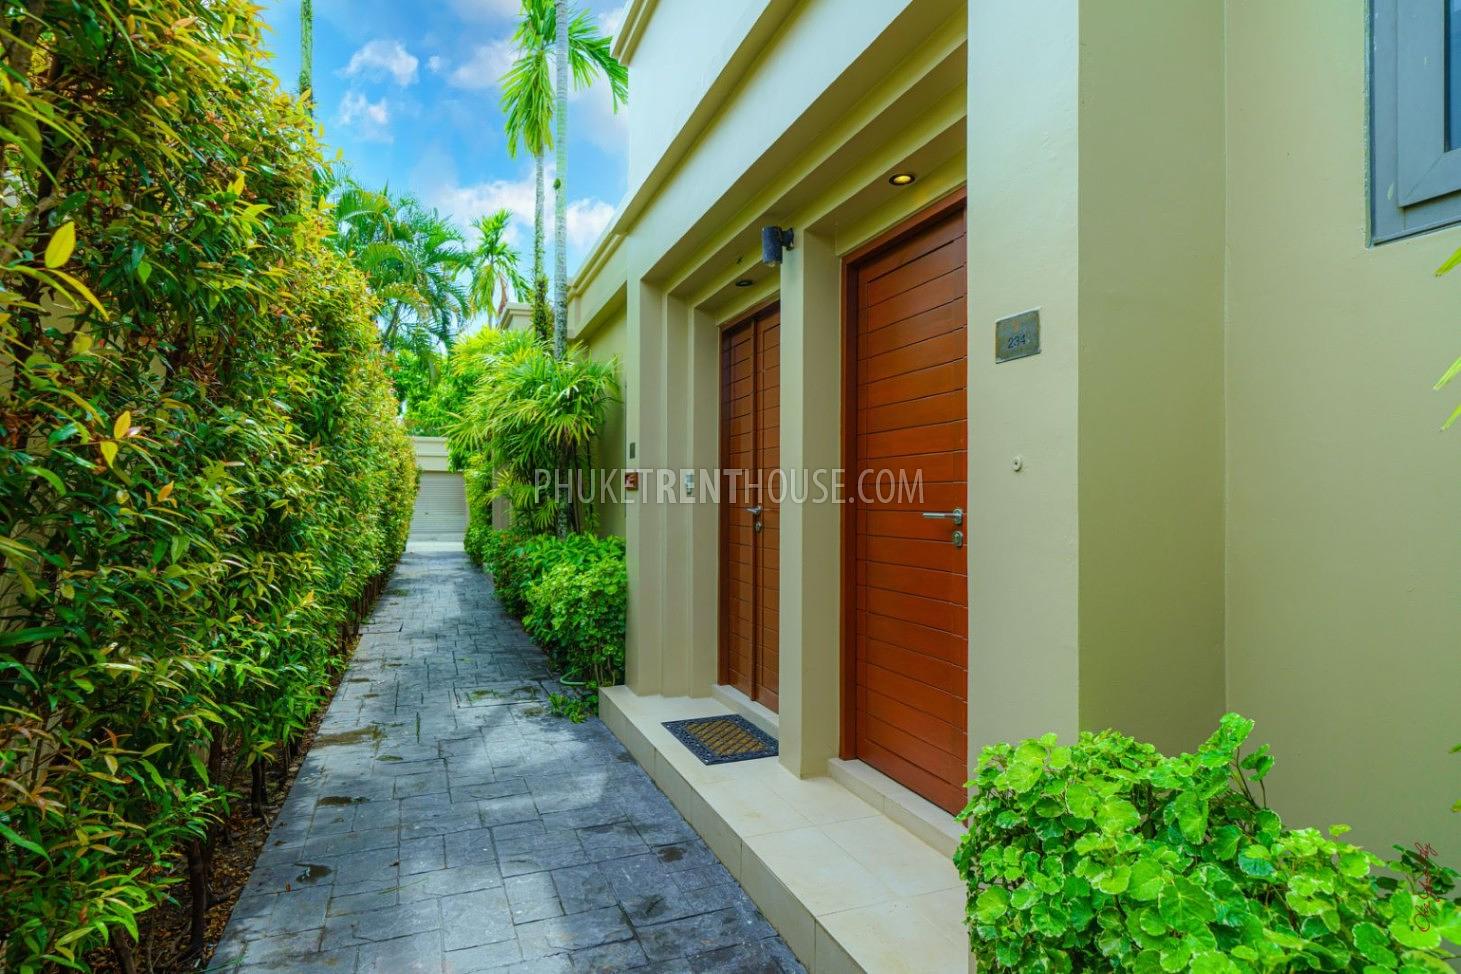 BAN21764: One bedroom villa with private pool on Bangtao beach. Photo #22